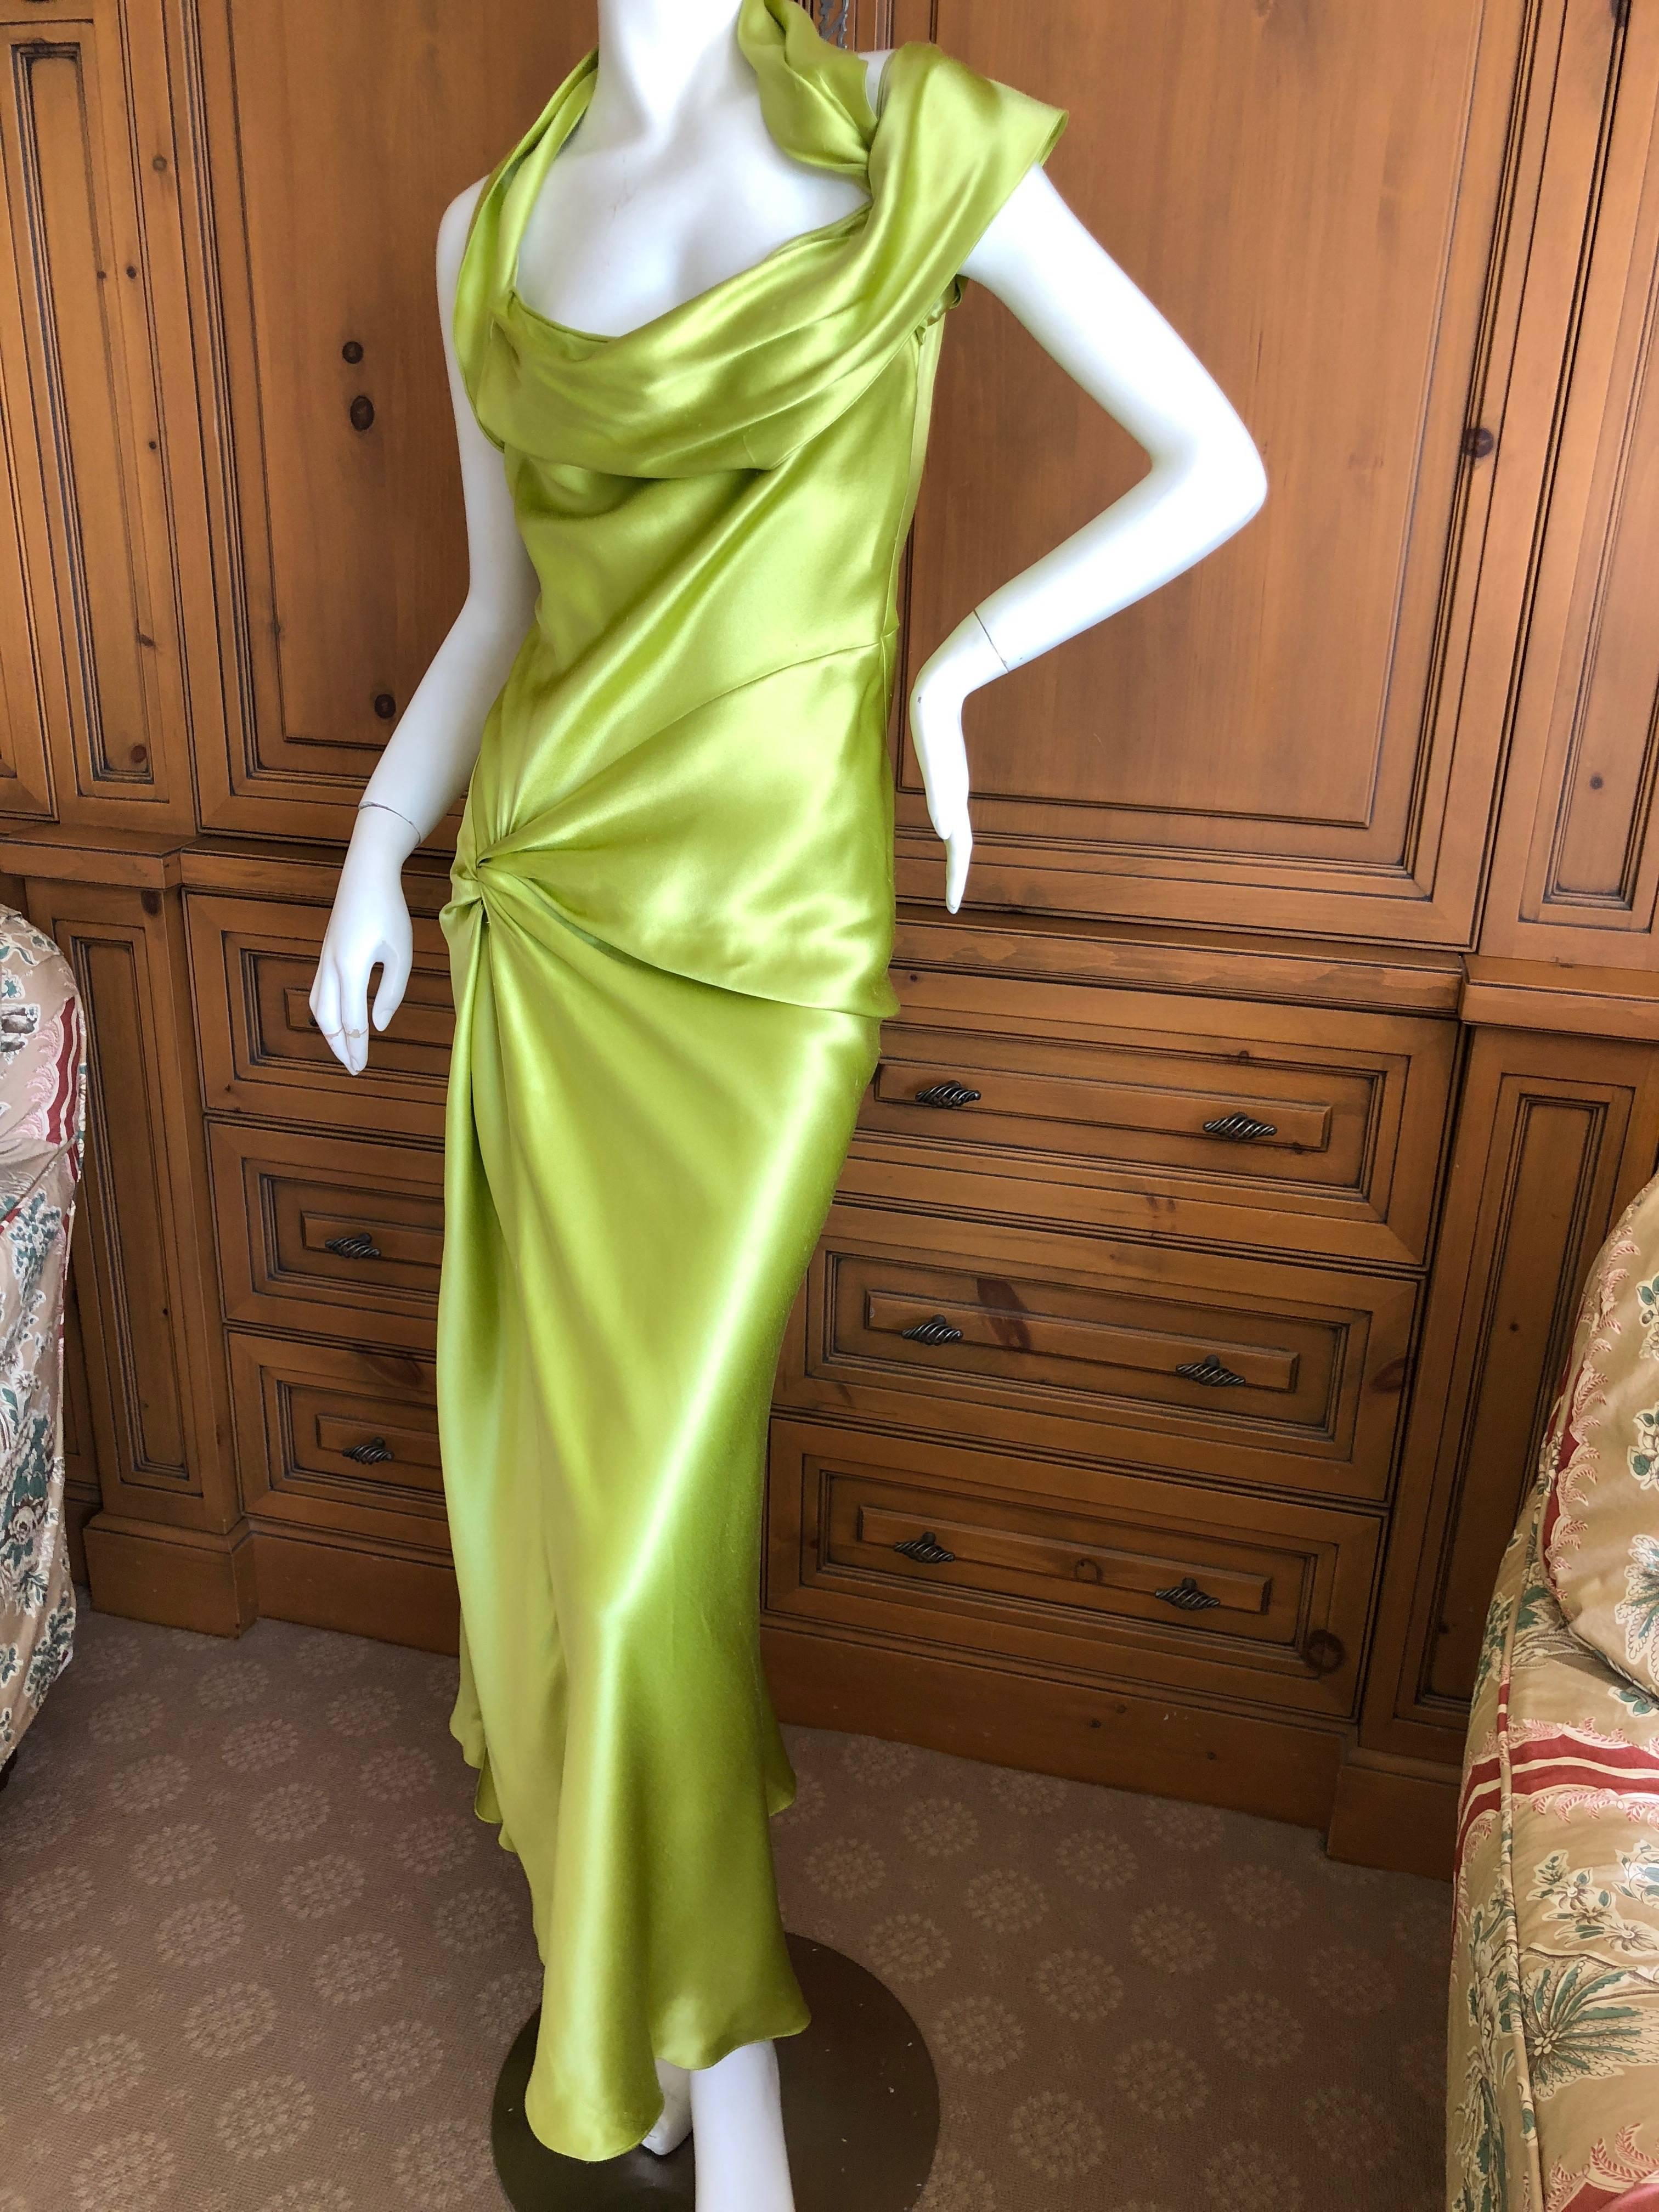 Christian Dior by John Galliano Bias Cut Green Silk Satin Dress with Knot Motif.
Wonderful green silk dress with cowl draped neck, knot at hip, and high slit is cut on the bias for a sensuous form fit , by Galliano.
Size 36
Bust 38